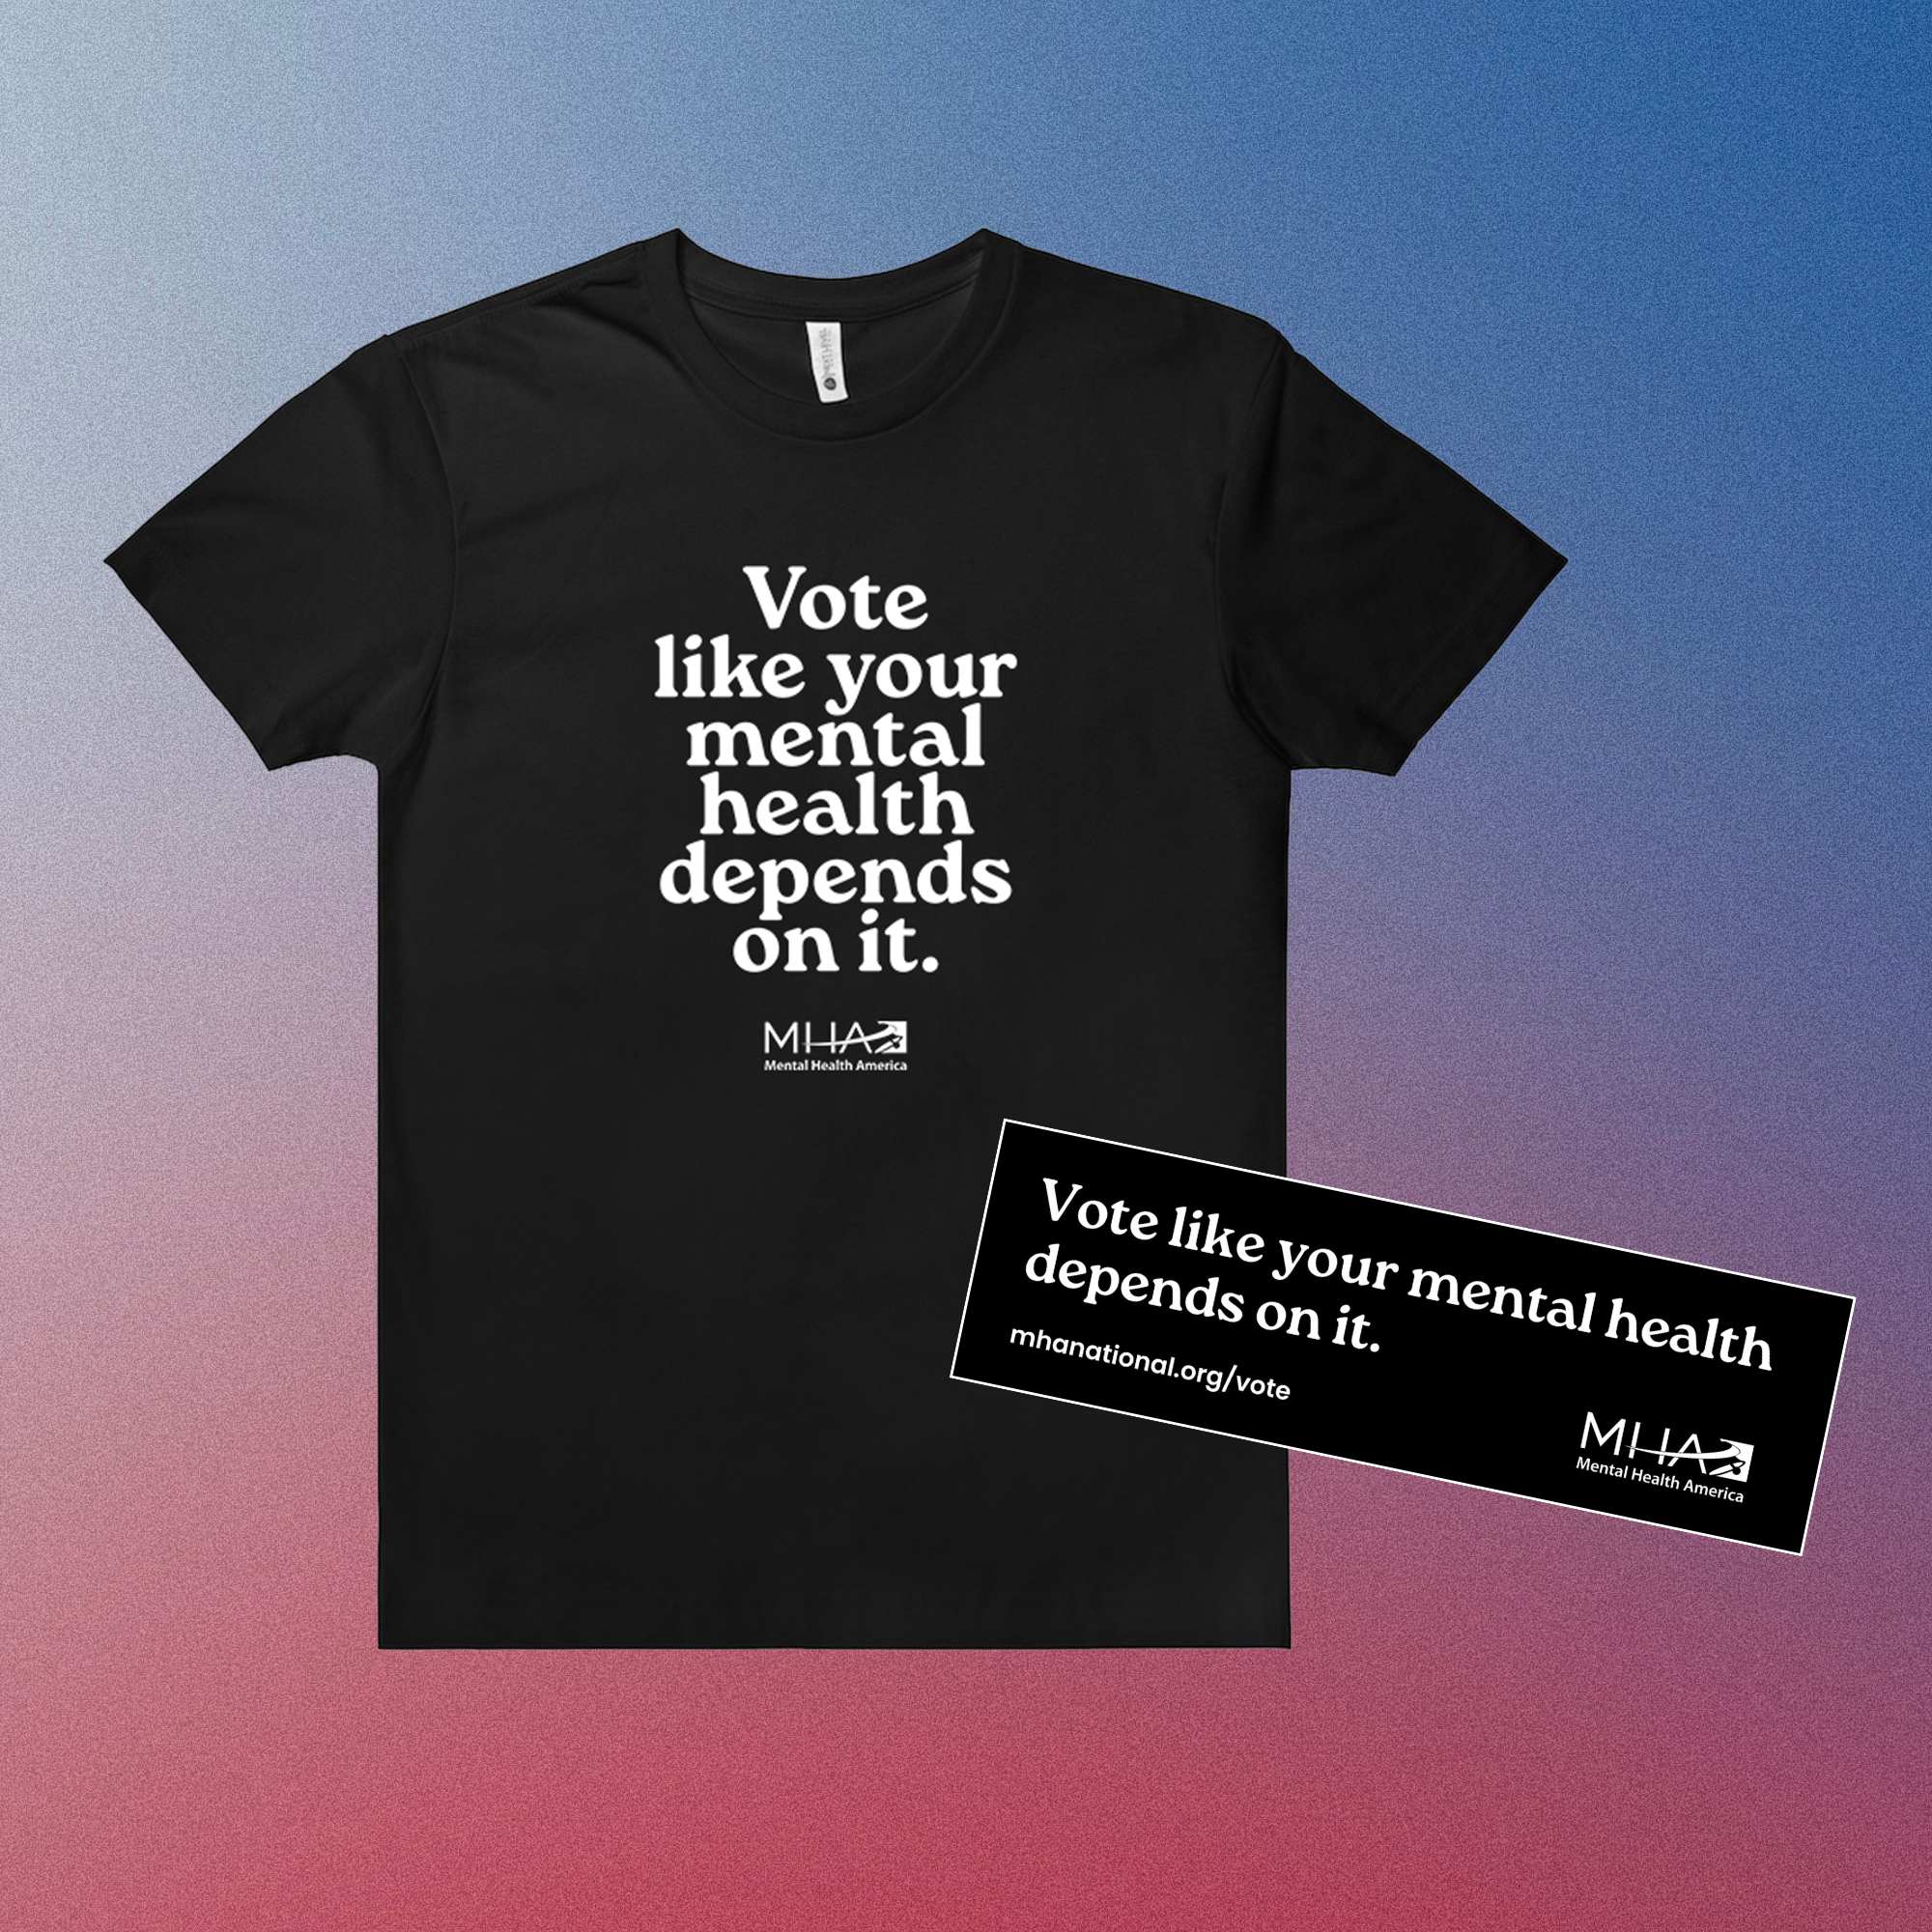 Black t-shirt that says Vote like your mental health depends on it.